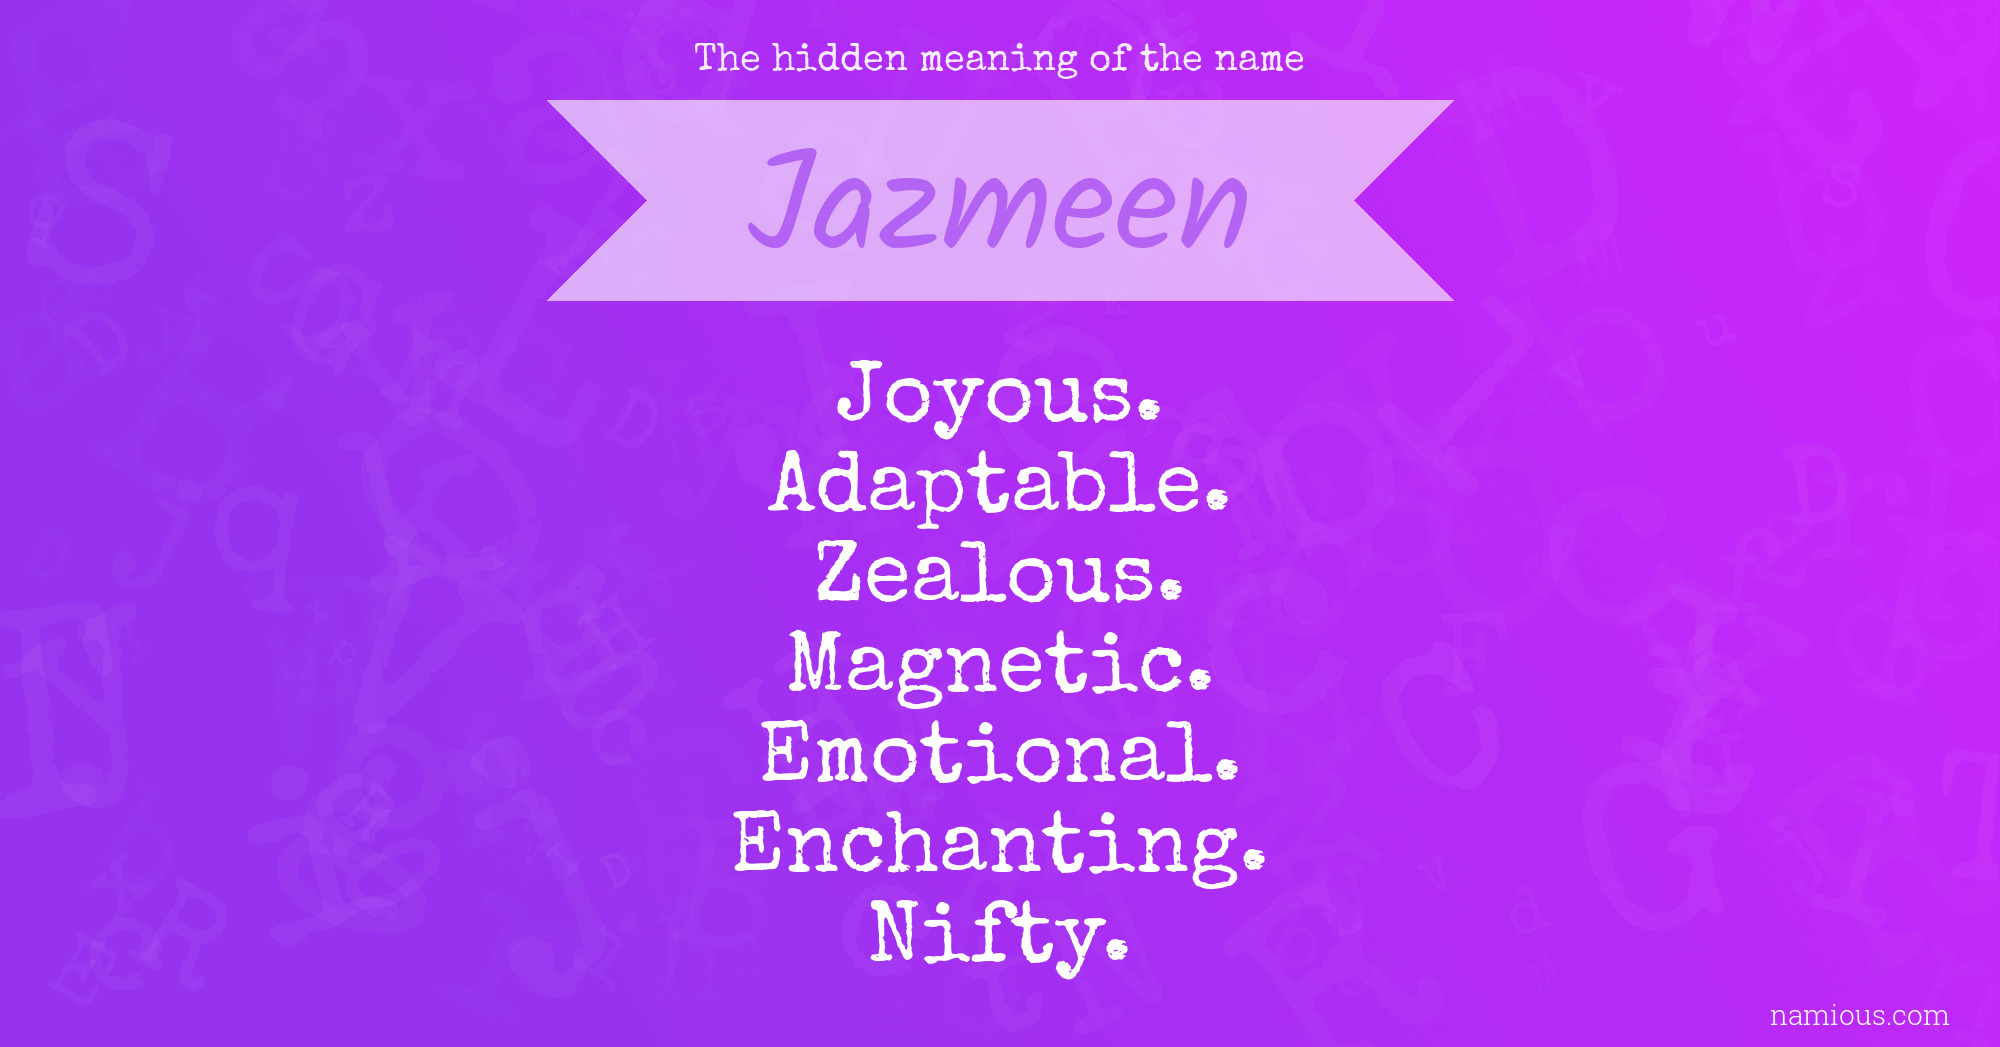 The hidden meaning of the name Jazmeen